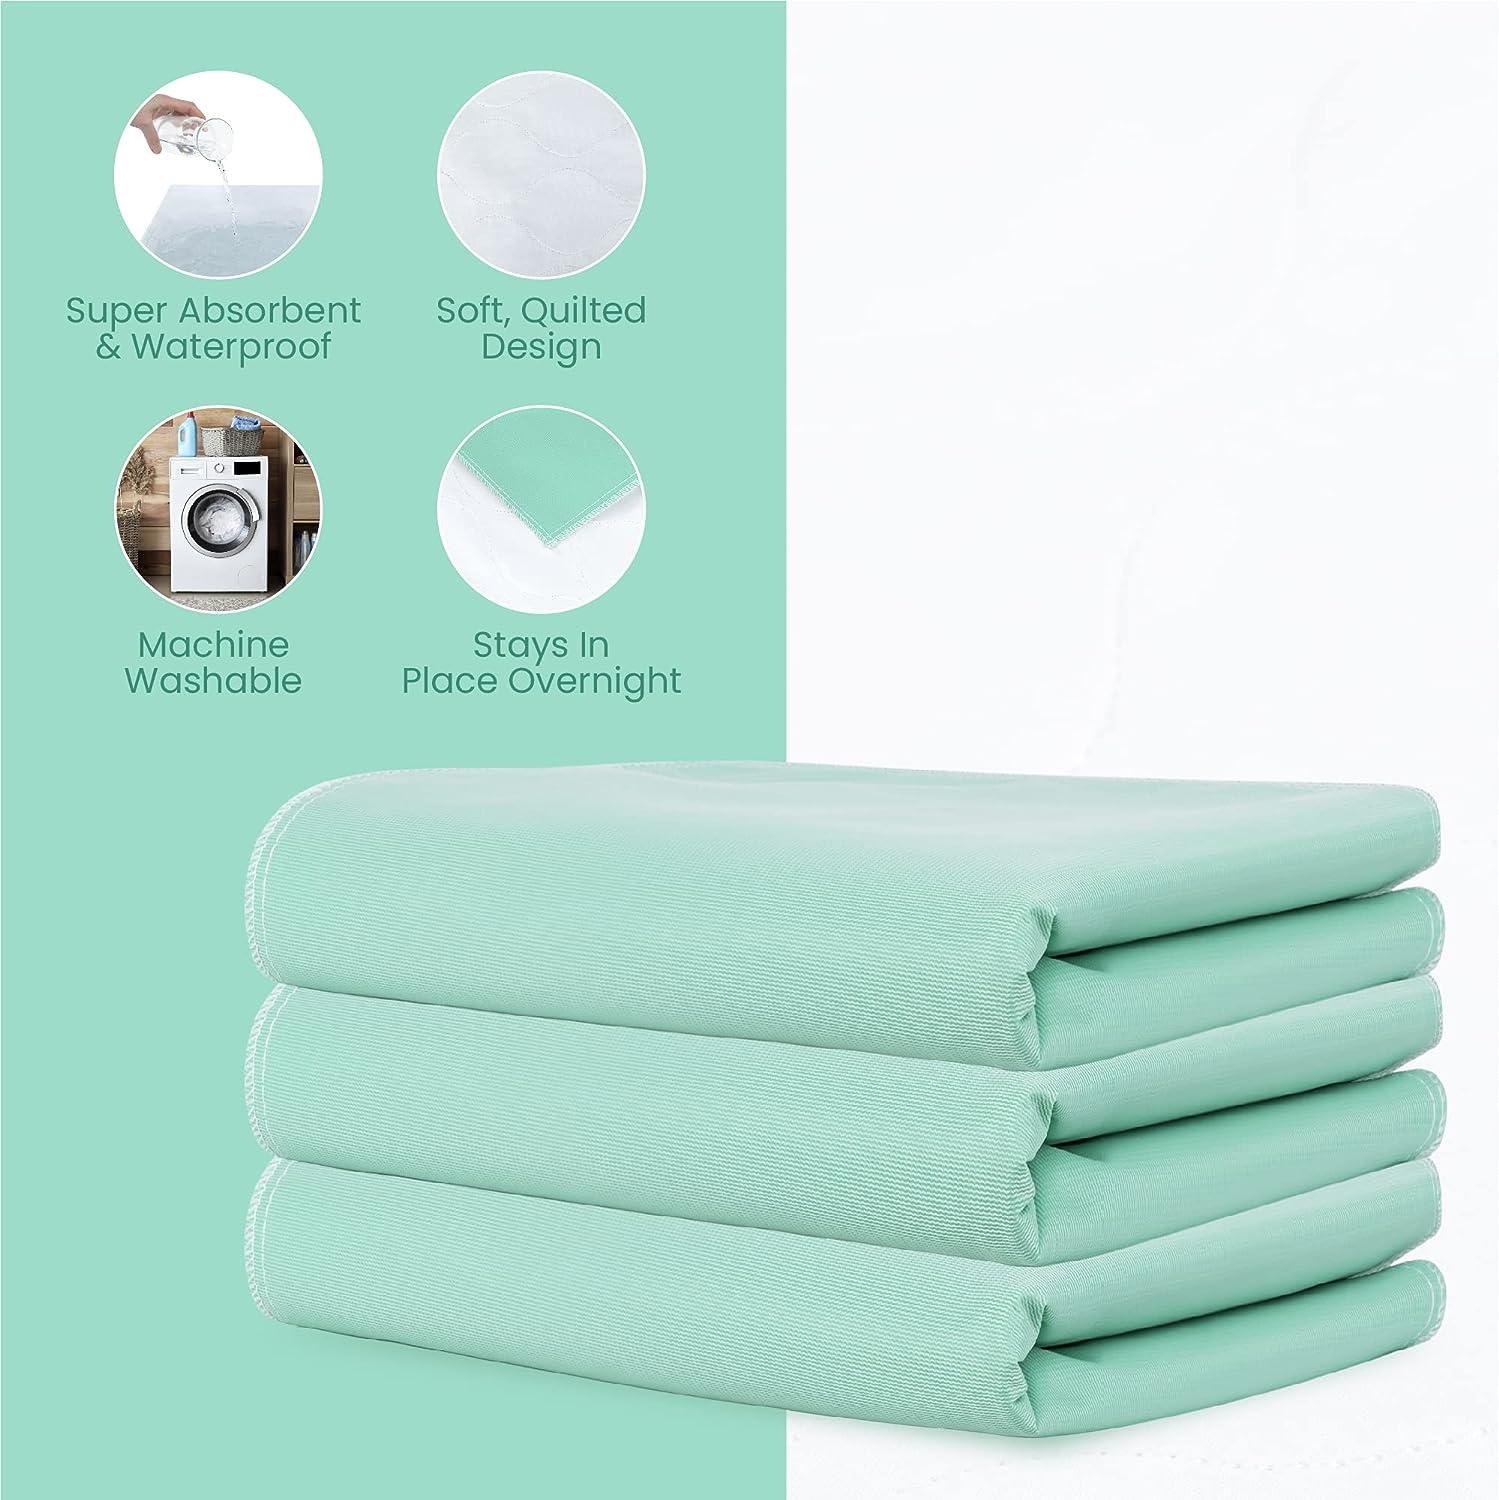 Unifree Disposable Underpads, Bed Pads, Incontinence Pad, Super